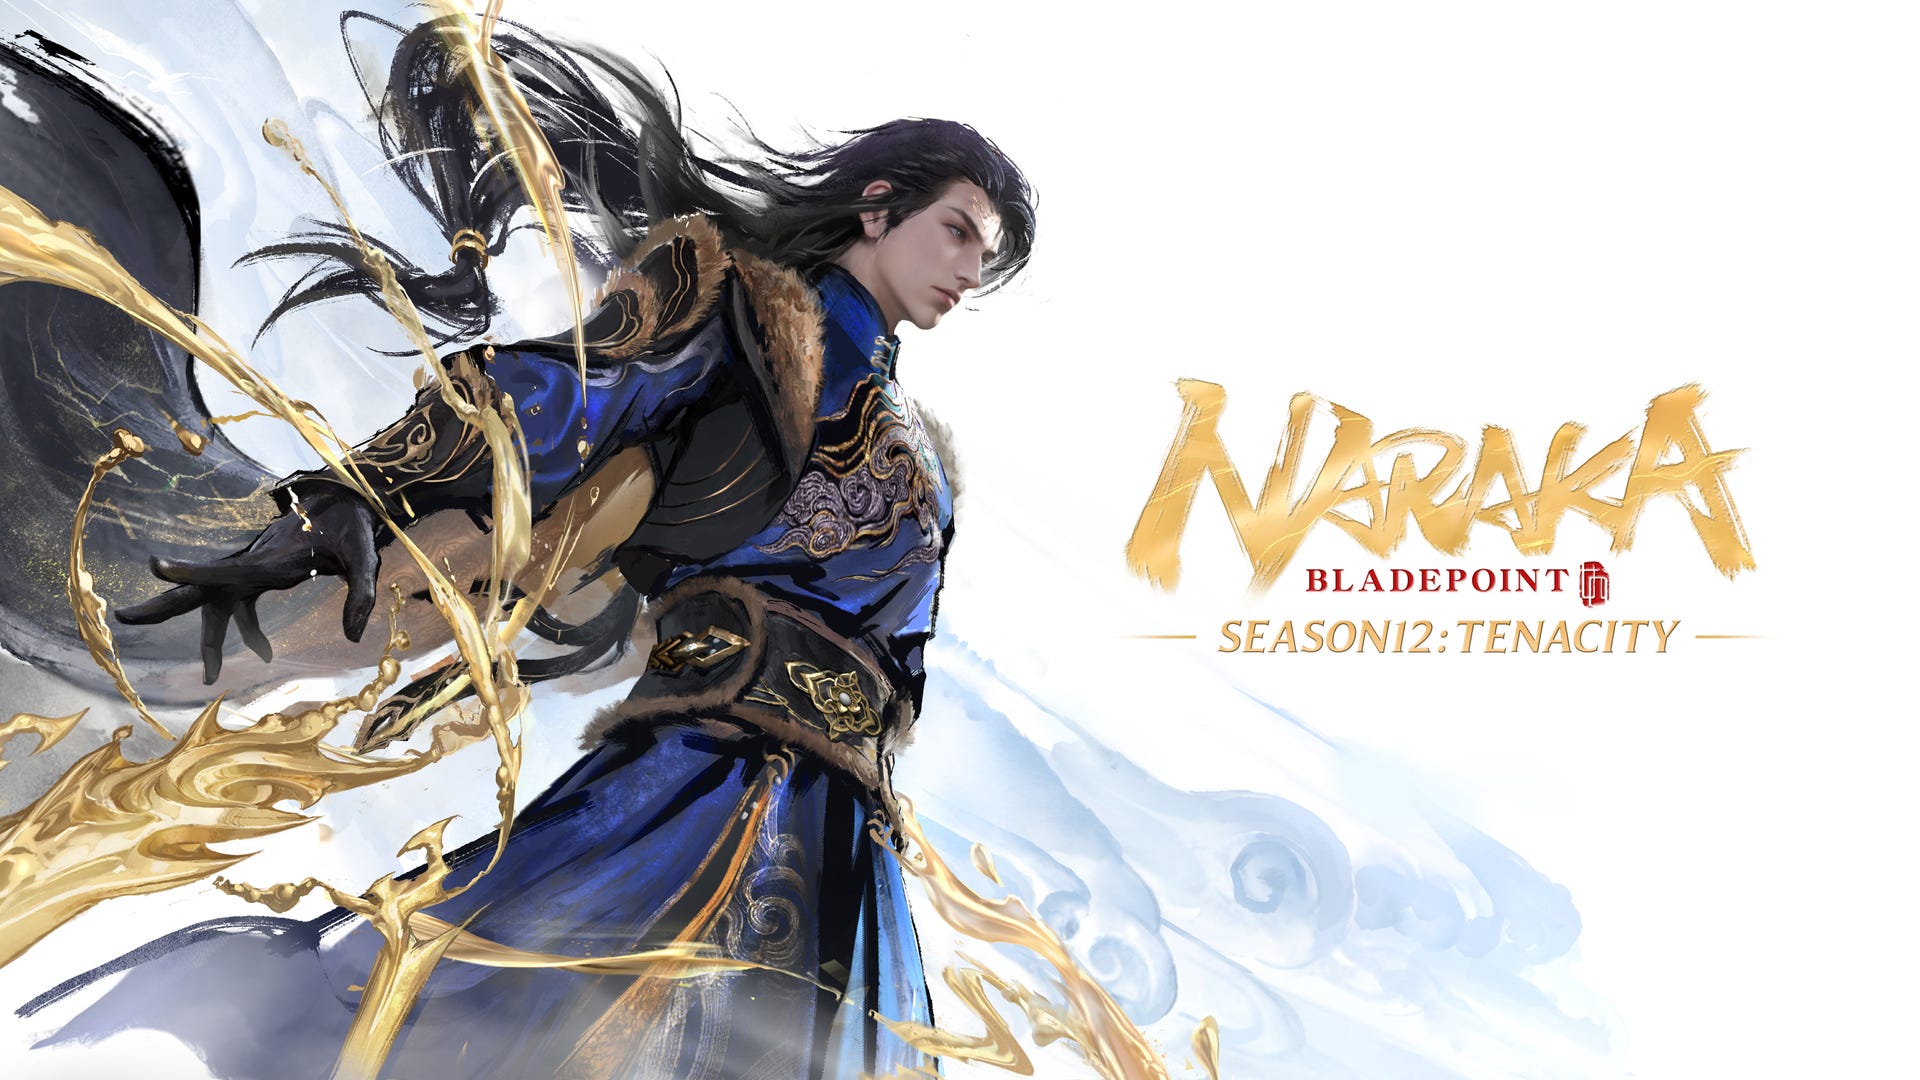 Naraka: Bladepoint’s Season 12 Potential revamp streamlines the game for new players without dumbing it down before new character arrival